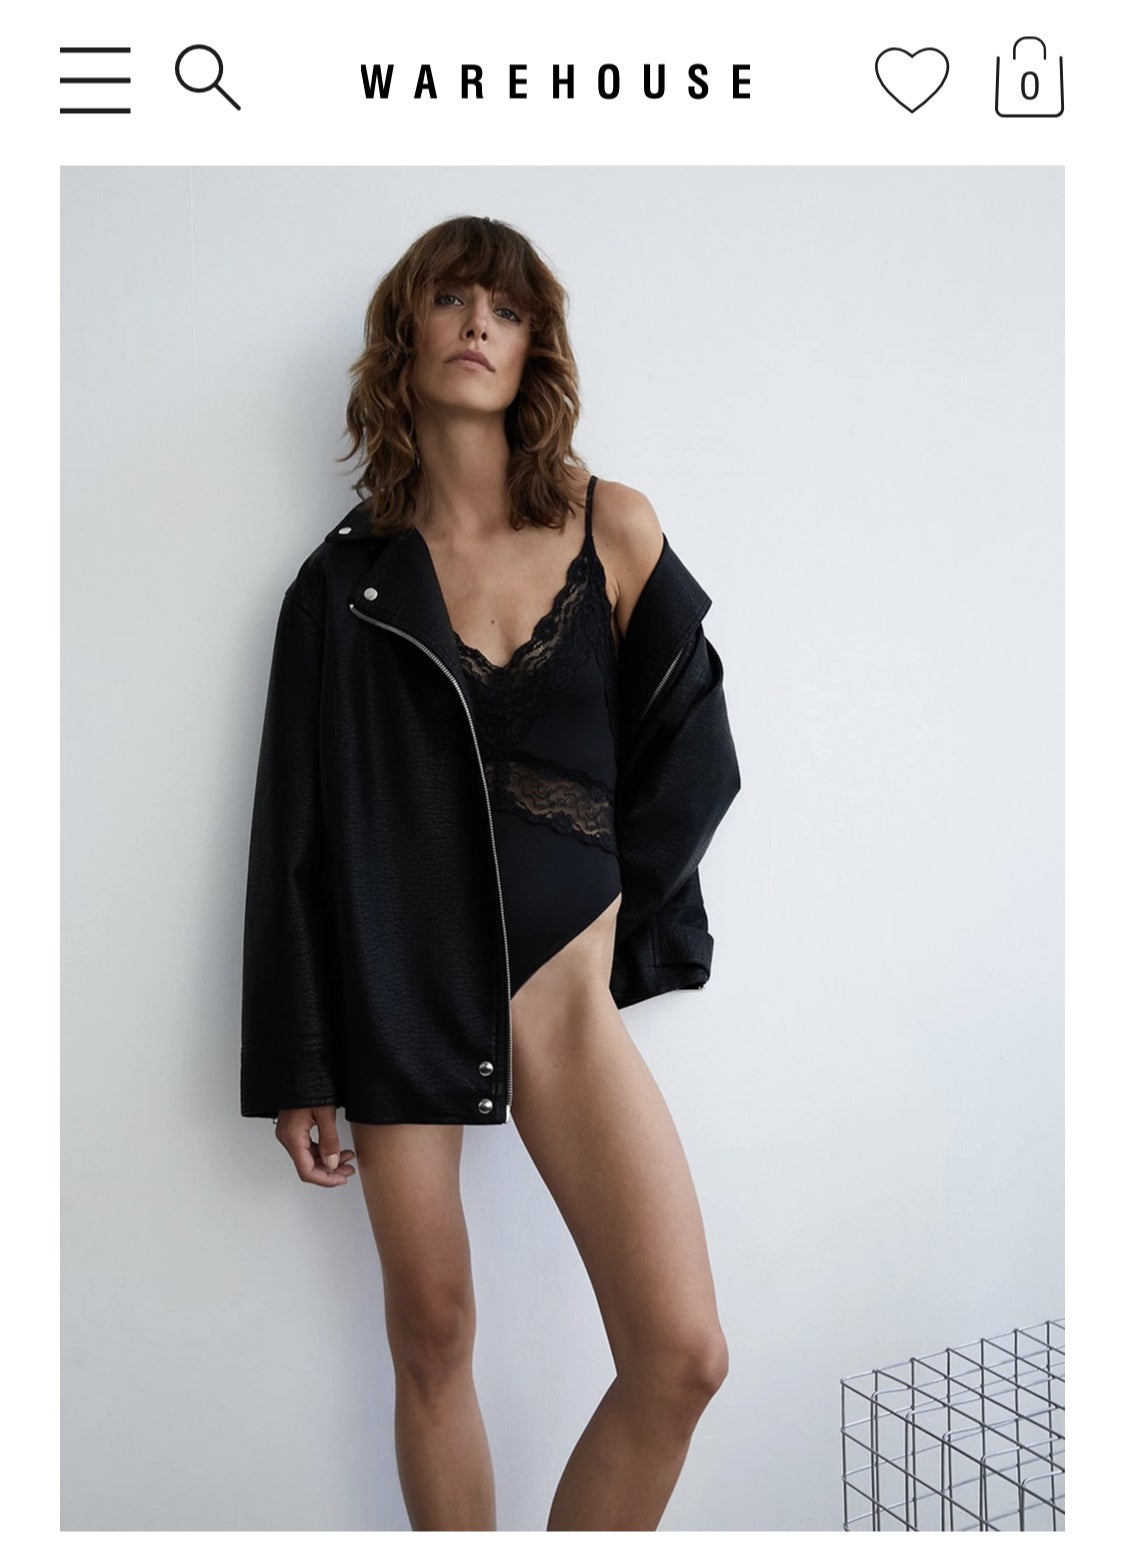 Warehouse advert featuring a model wearing an oversized jacket and bodysuit